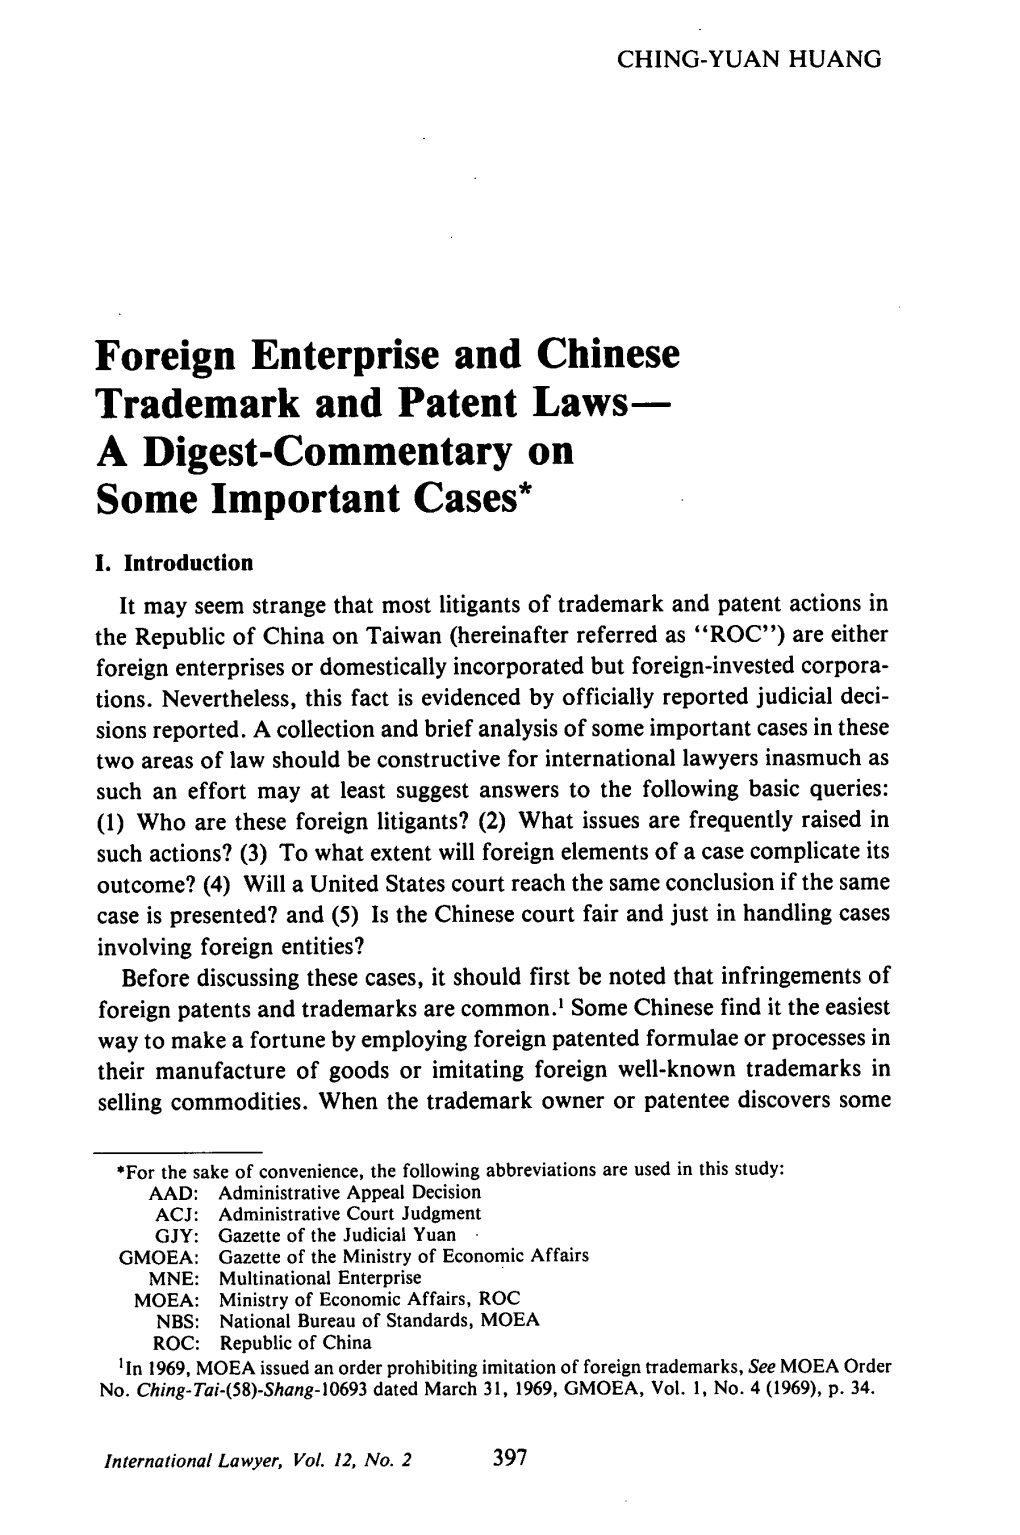 Foreign Enterprise and Chinese Trademark and Patent Laws- a Digest-Commentary on Some Important Cases*